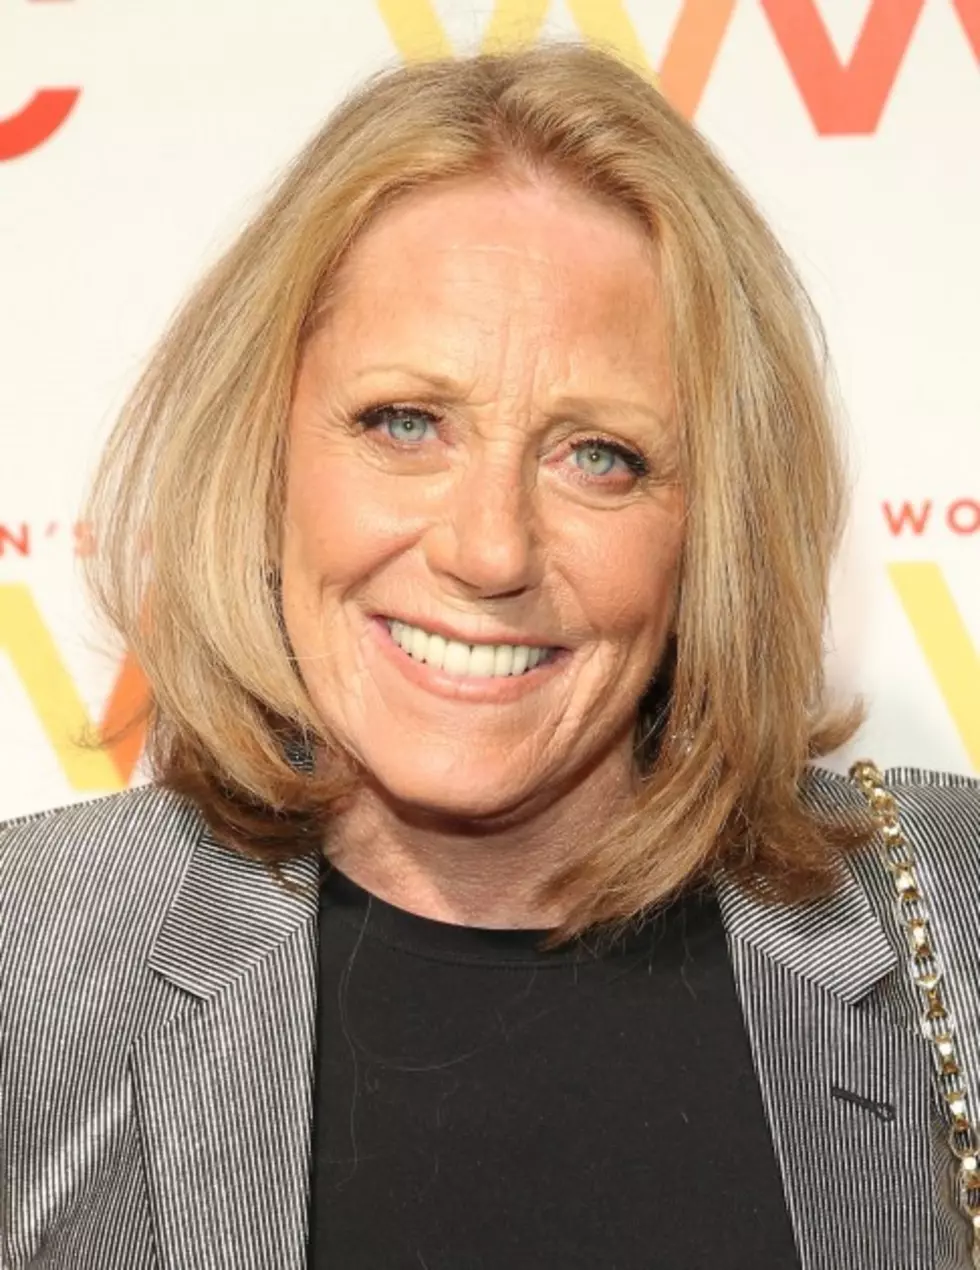 Lesley Gore Dead at 68, Rayman Tells of His Interview and Meeting With Her [AUDIO]